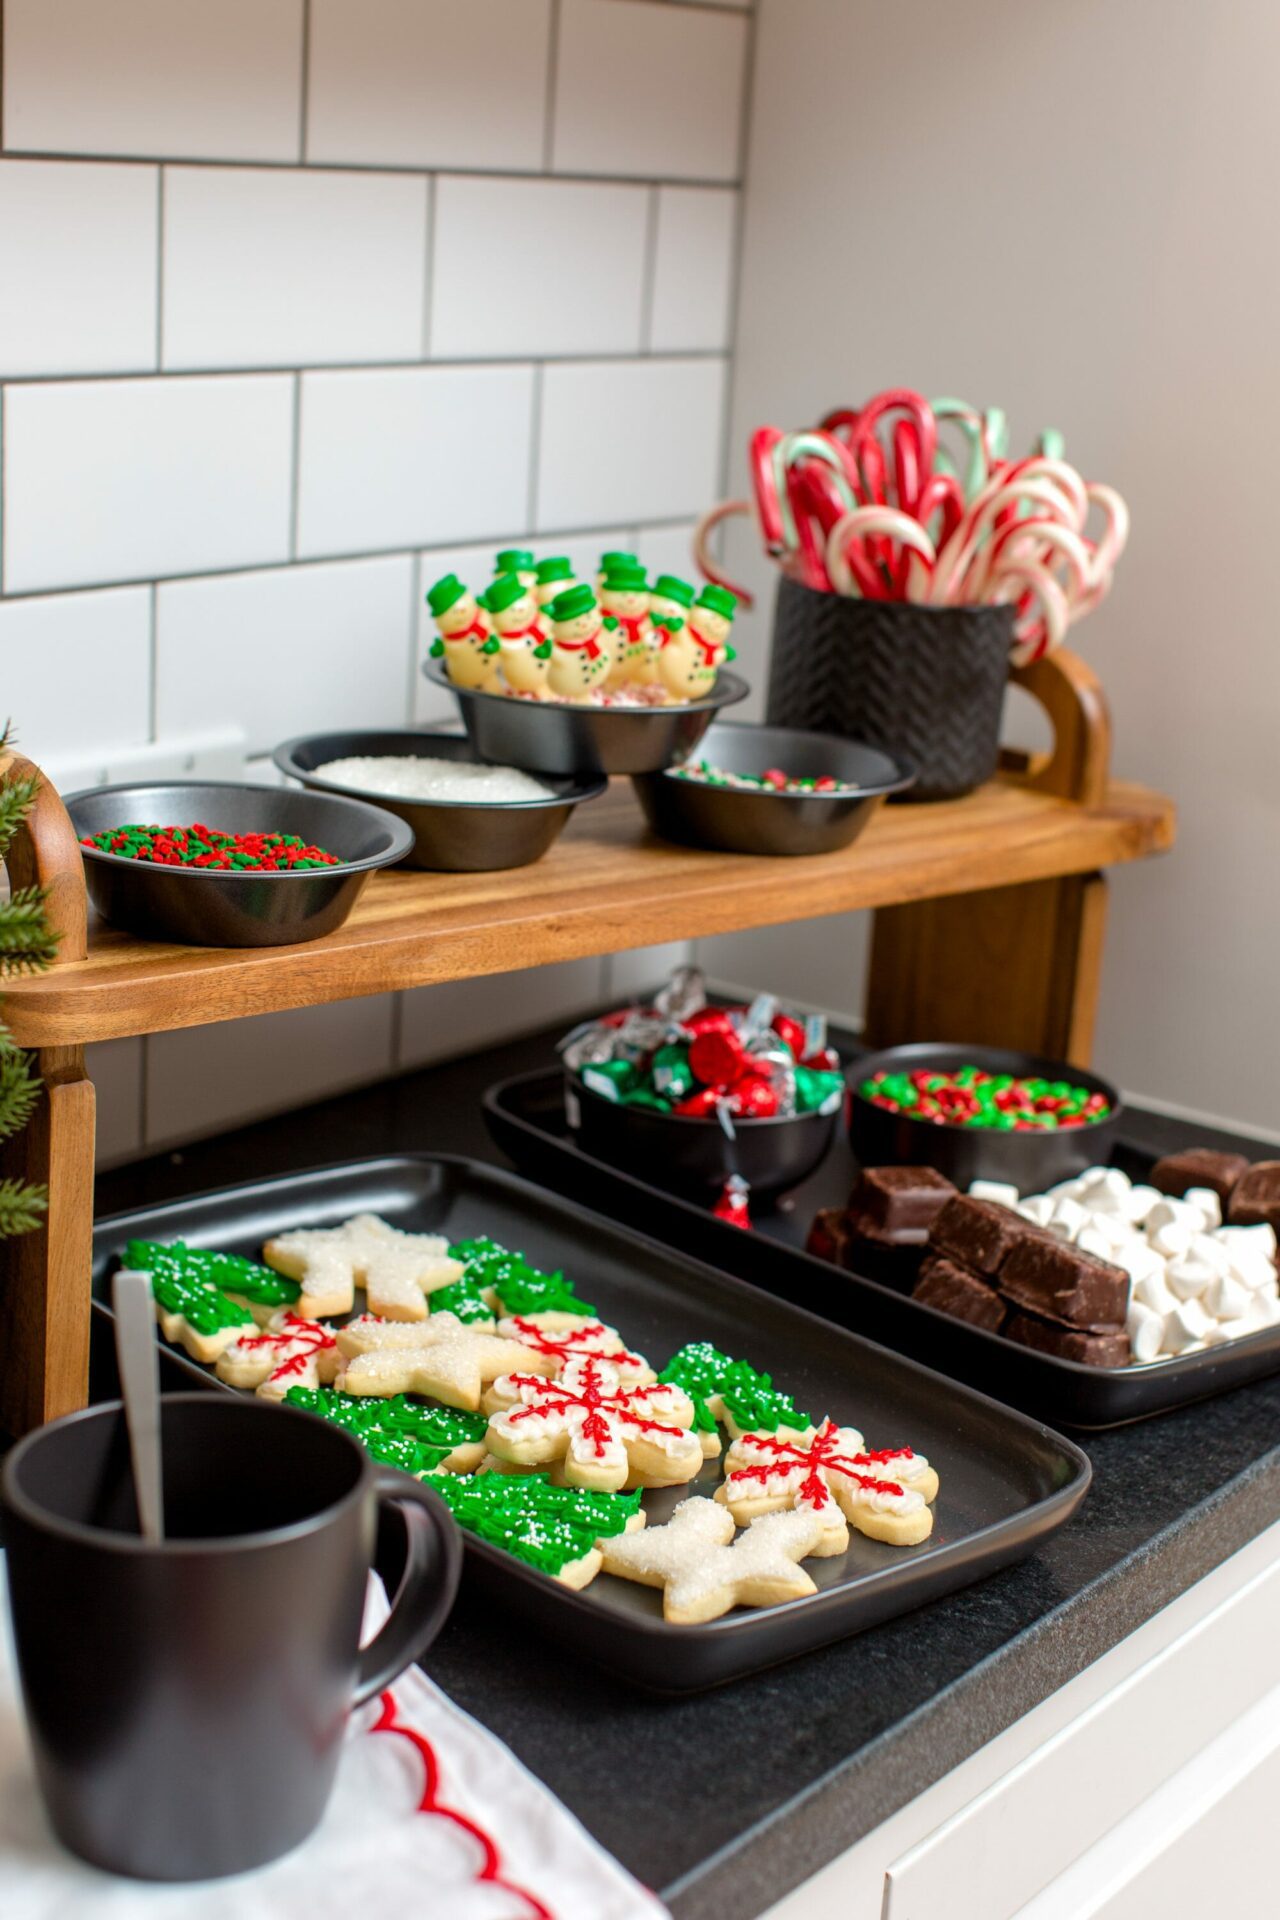 Cookie Squad Favorite Things Party | holiday party ideas | how to host a favorite things party || JennyCookies.com #holidayparty #favoritethings #partyideas #jennycookies